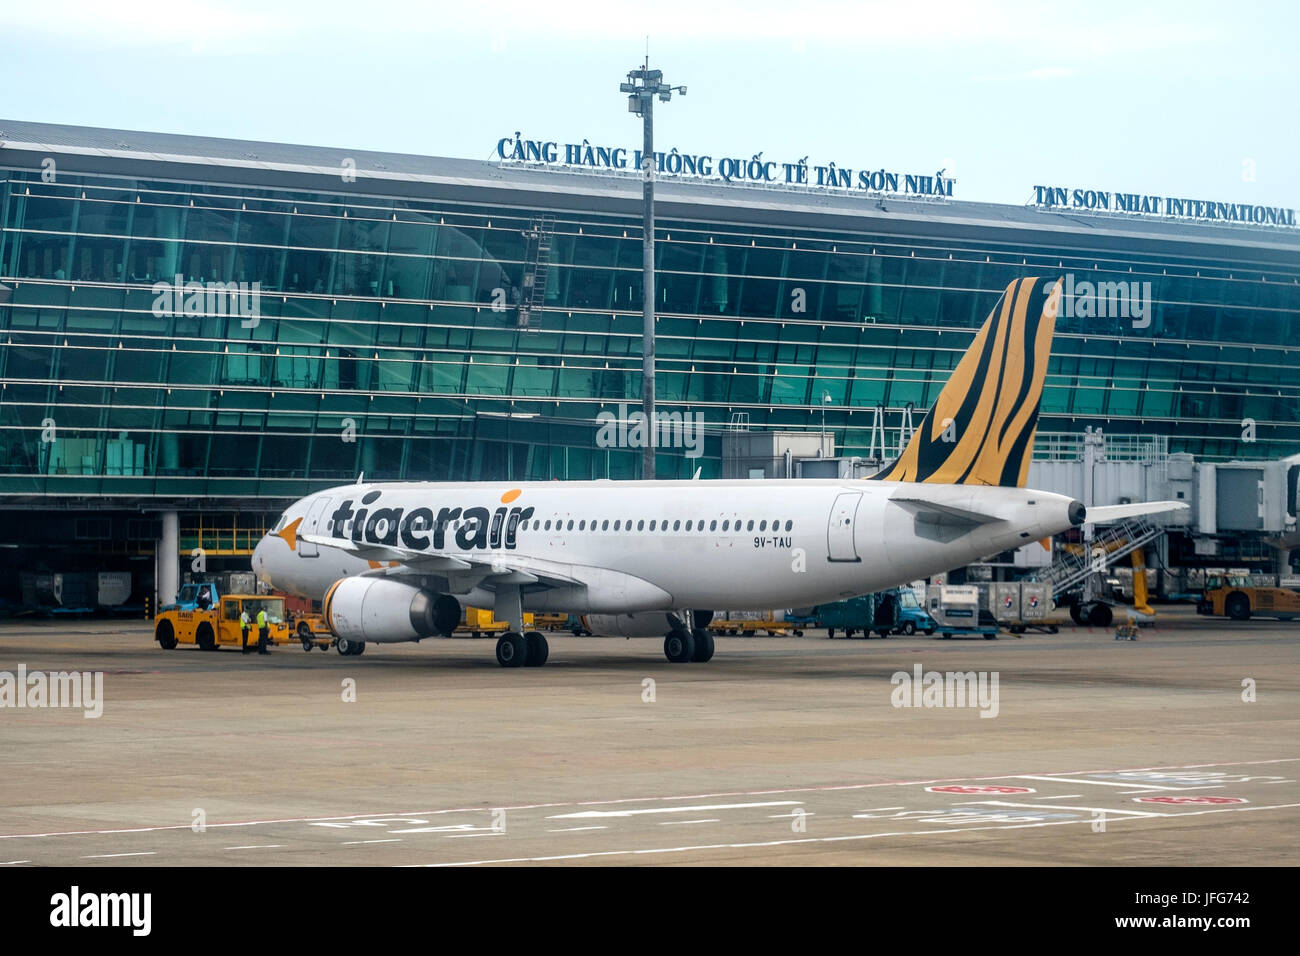 Tigerair airlines Airbus A320-232 airplane at Tan Son Nhat international airport in Ho Chi Minh, Vietnam Stock Photo